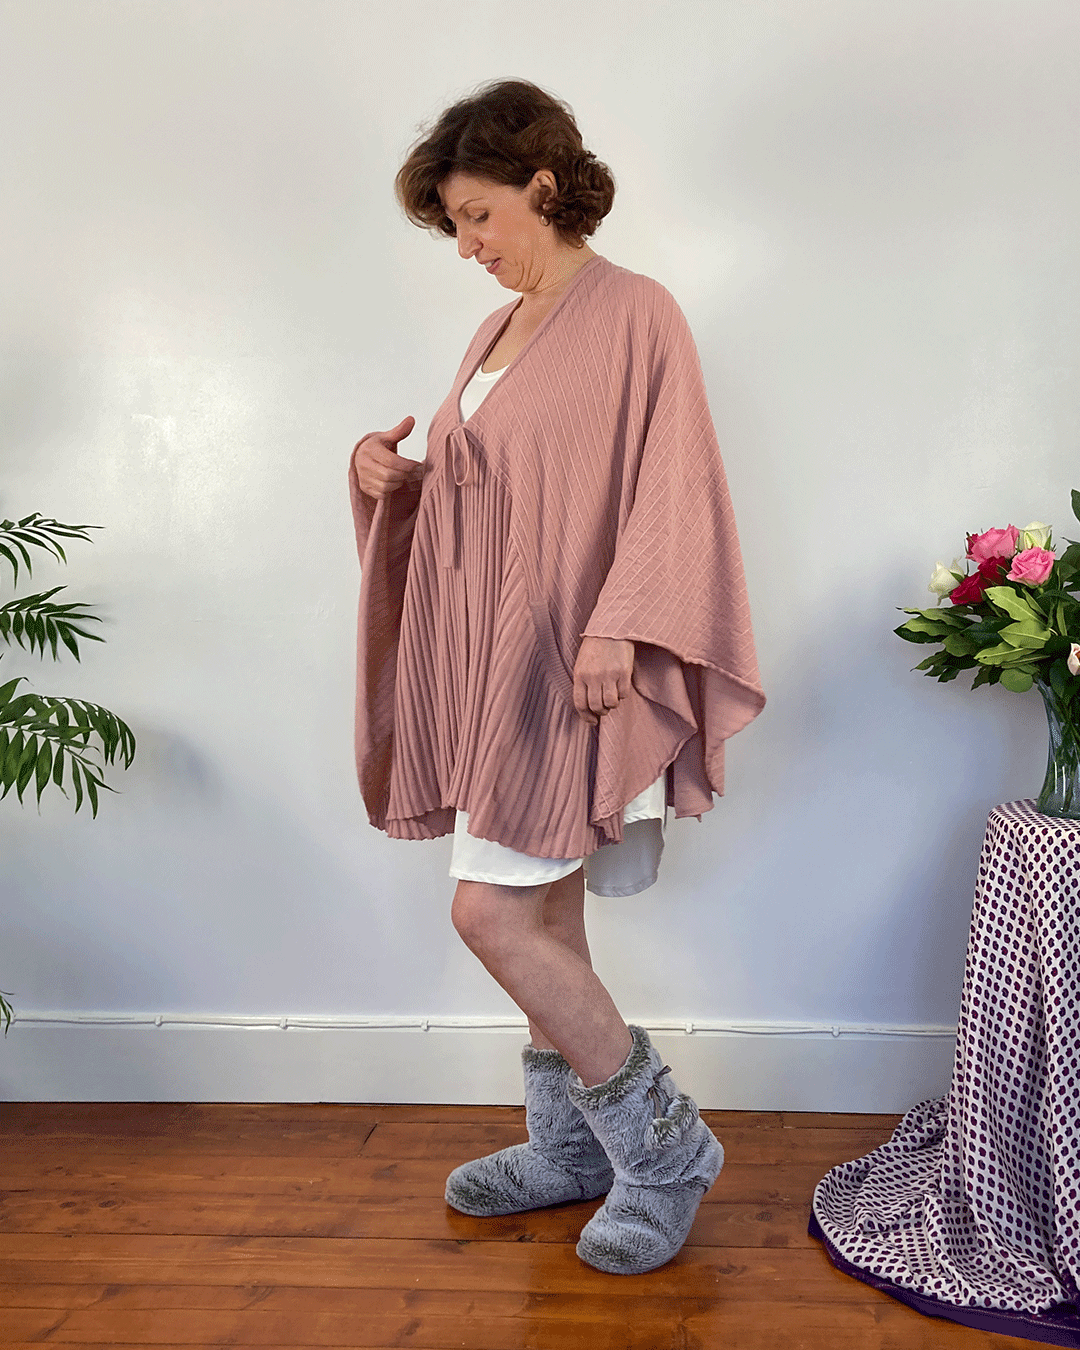 Valerie, 5'7" tall and a size medium (14-16) wears the pink cardi-cape and has just finished adjusting the tie-front. An alternative for medicine for hot flushes